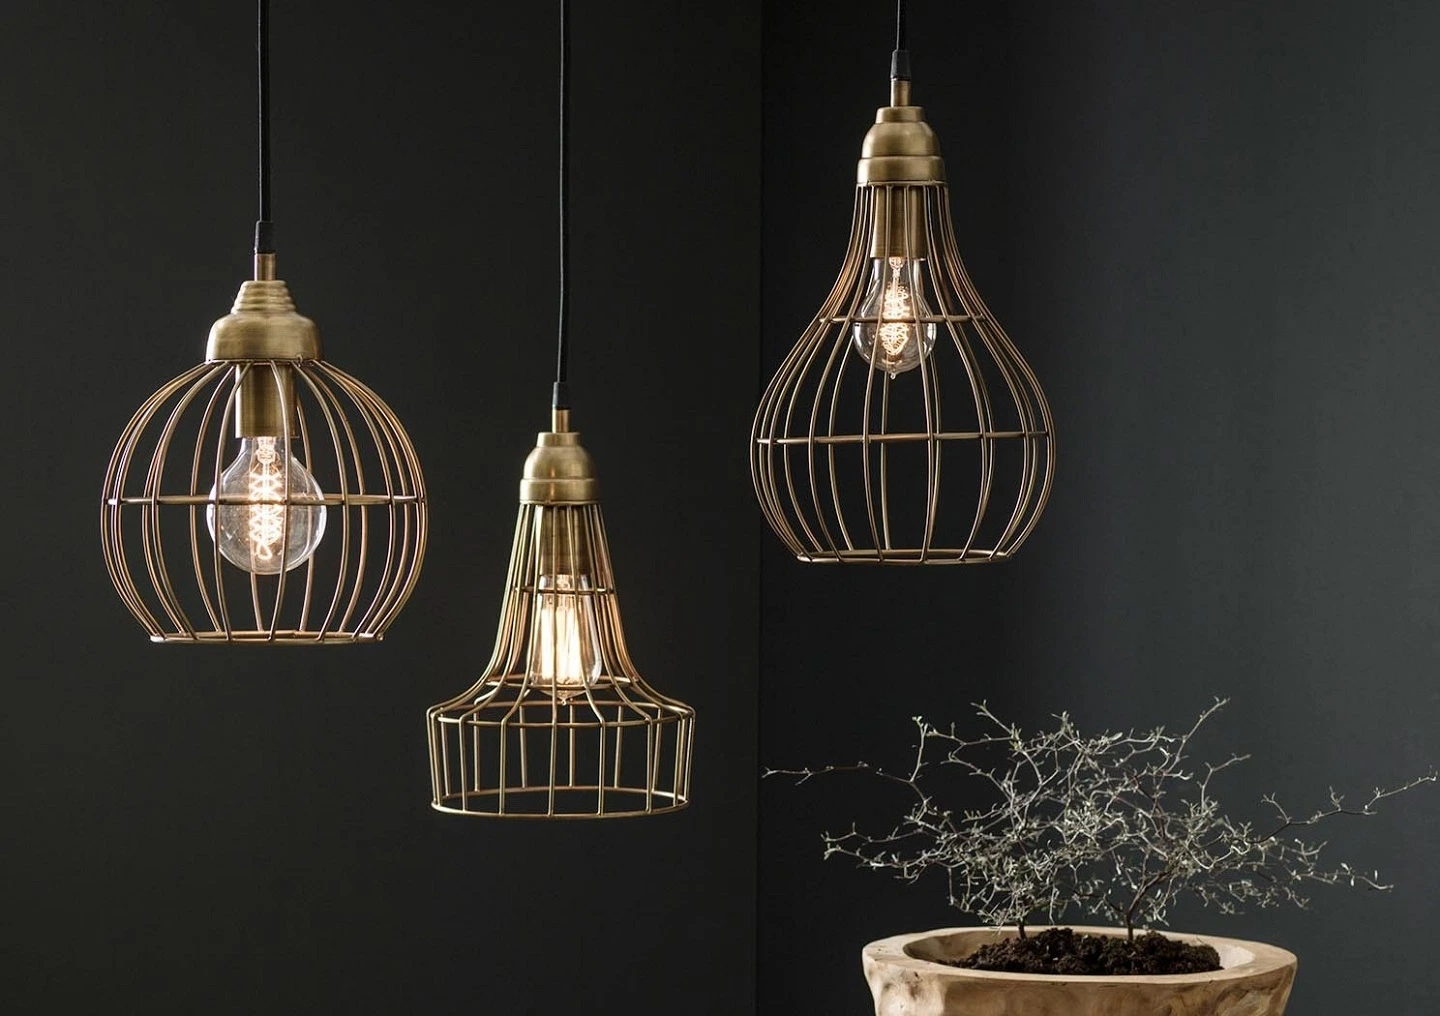 What is the difference between Hanging Lights and Pendant Lights?